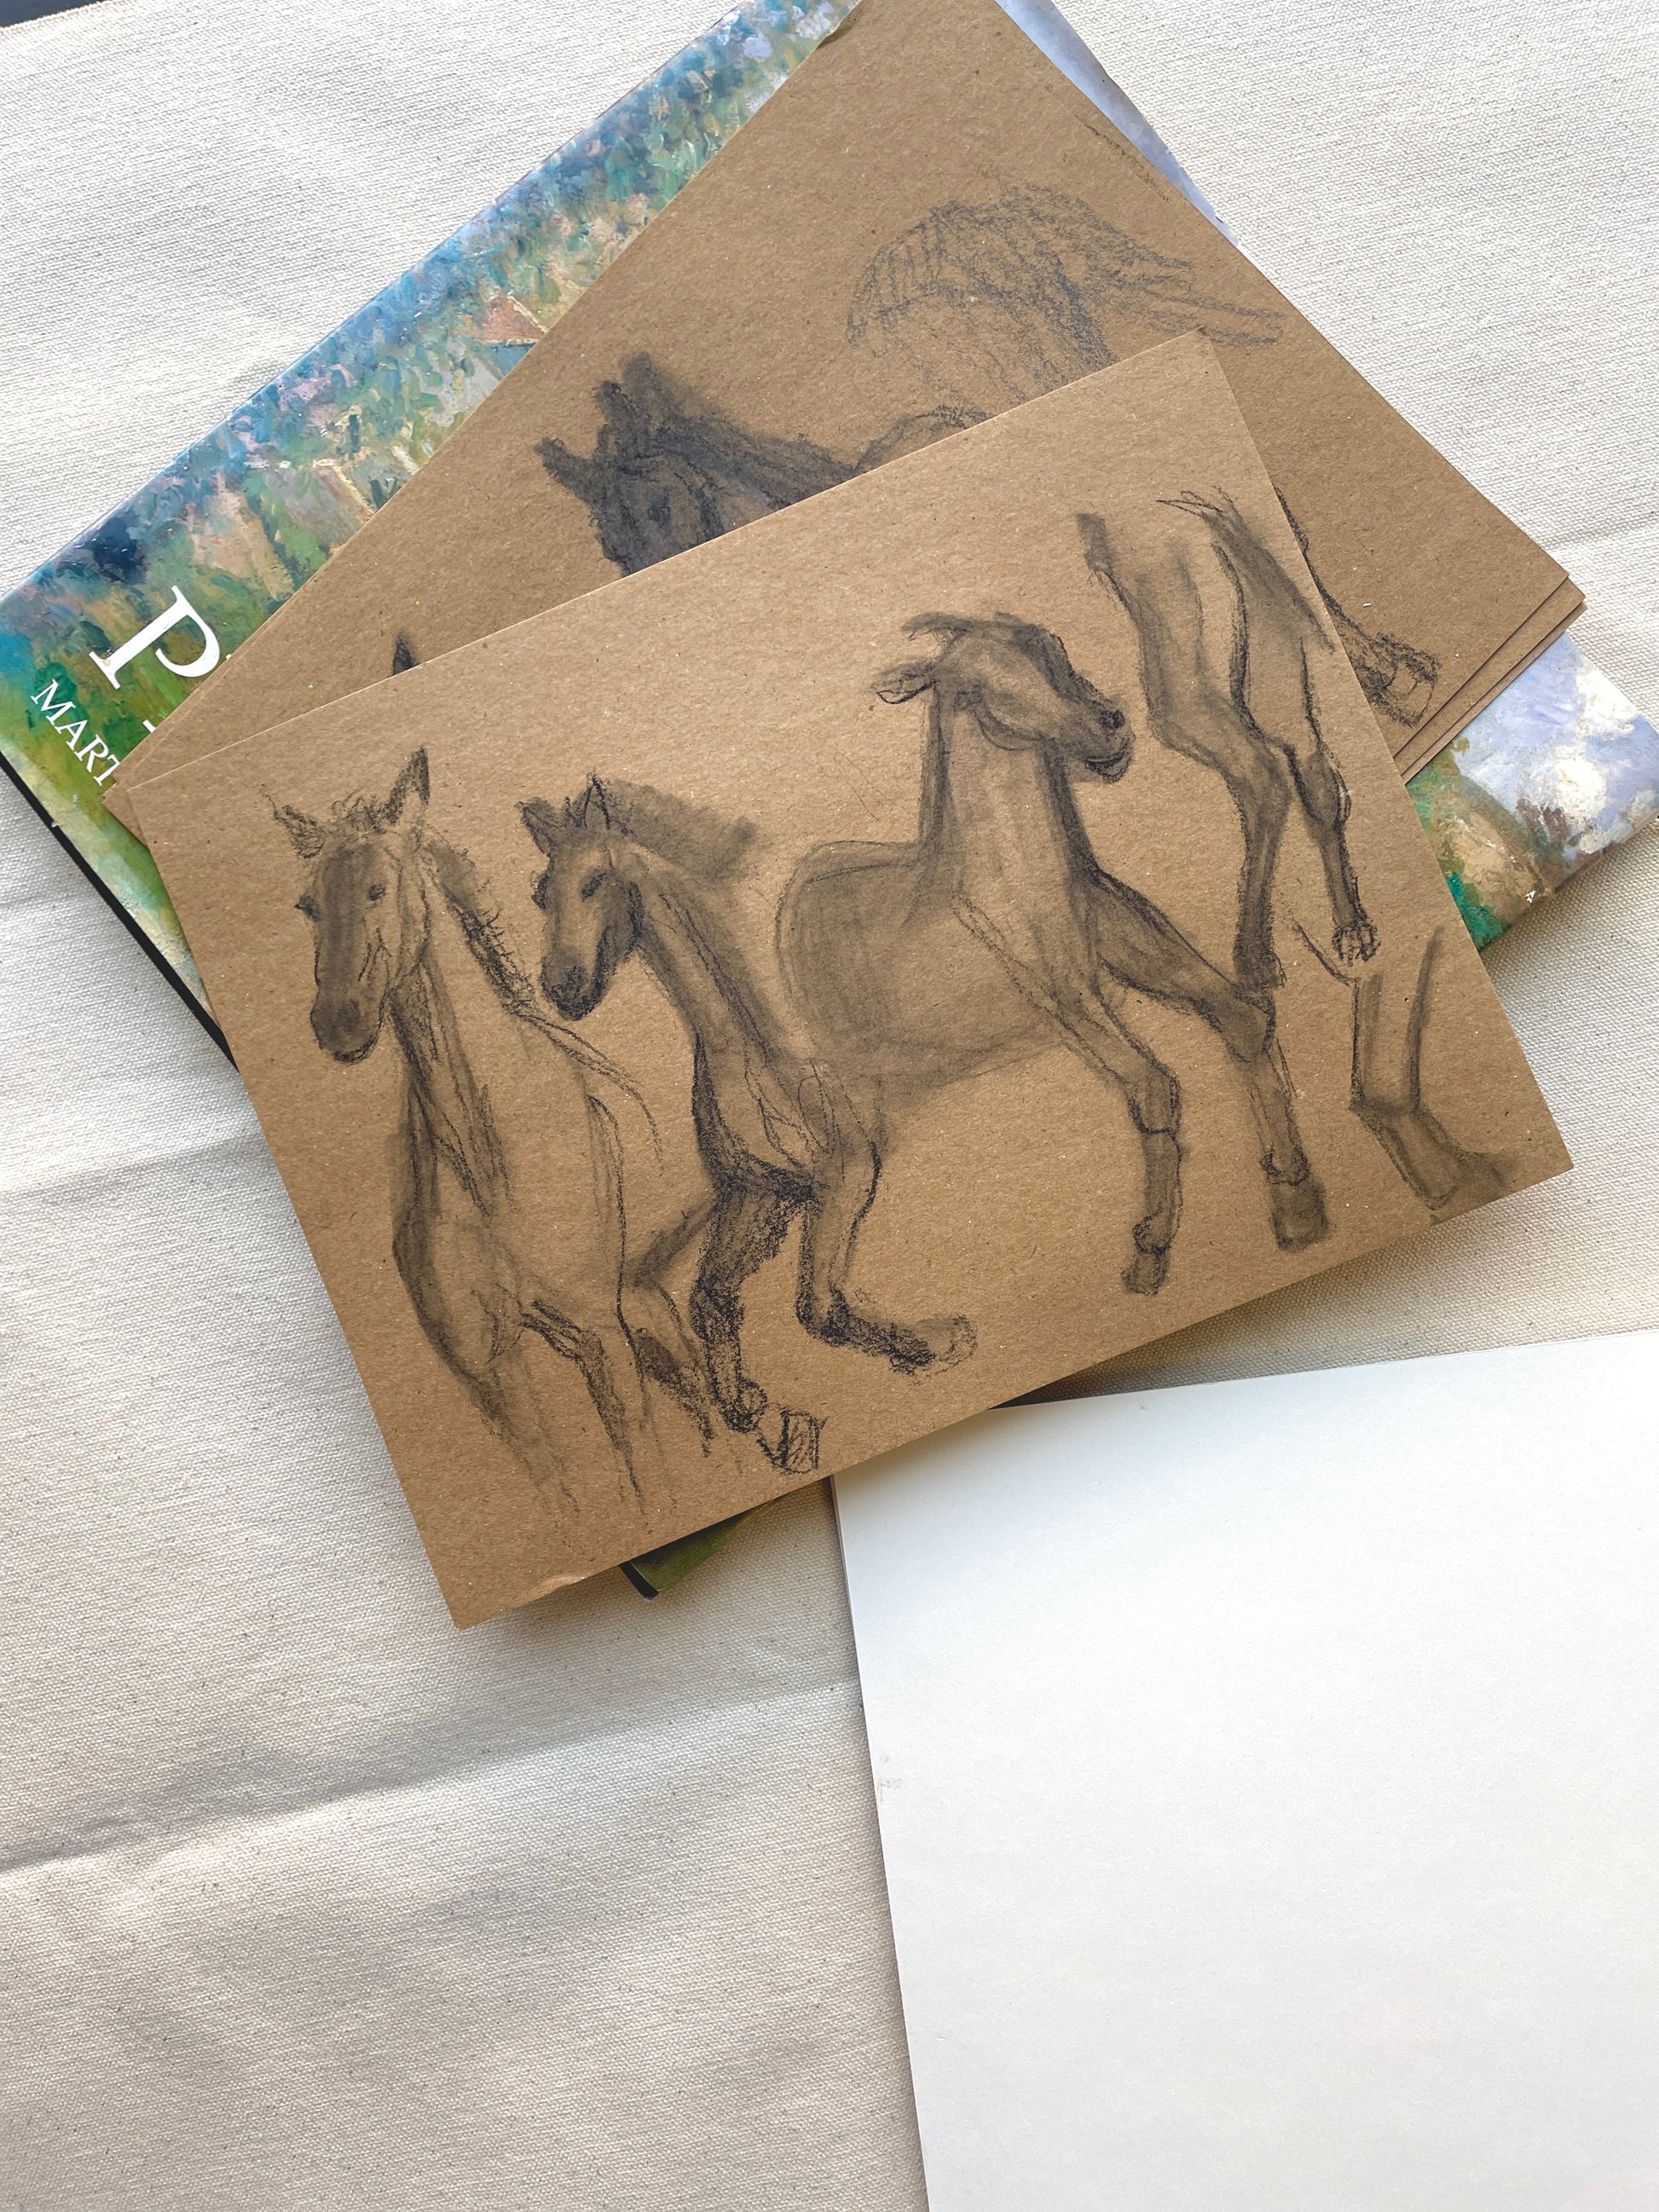 Charcoal sketch of galloping horses on natural craft paper